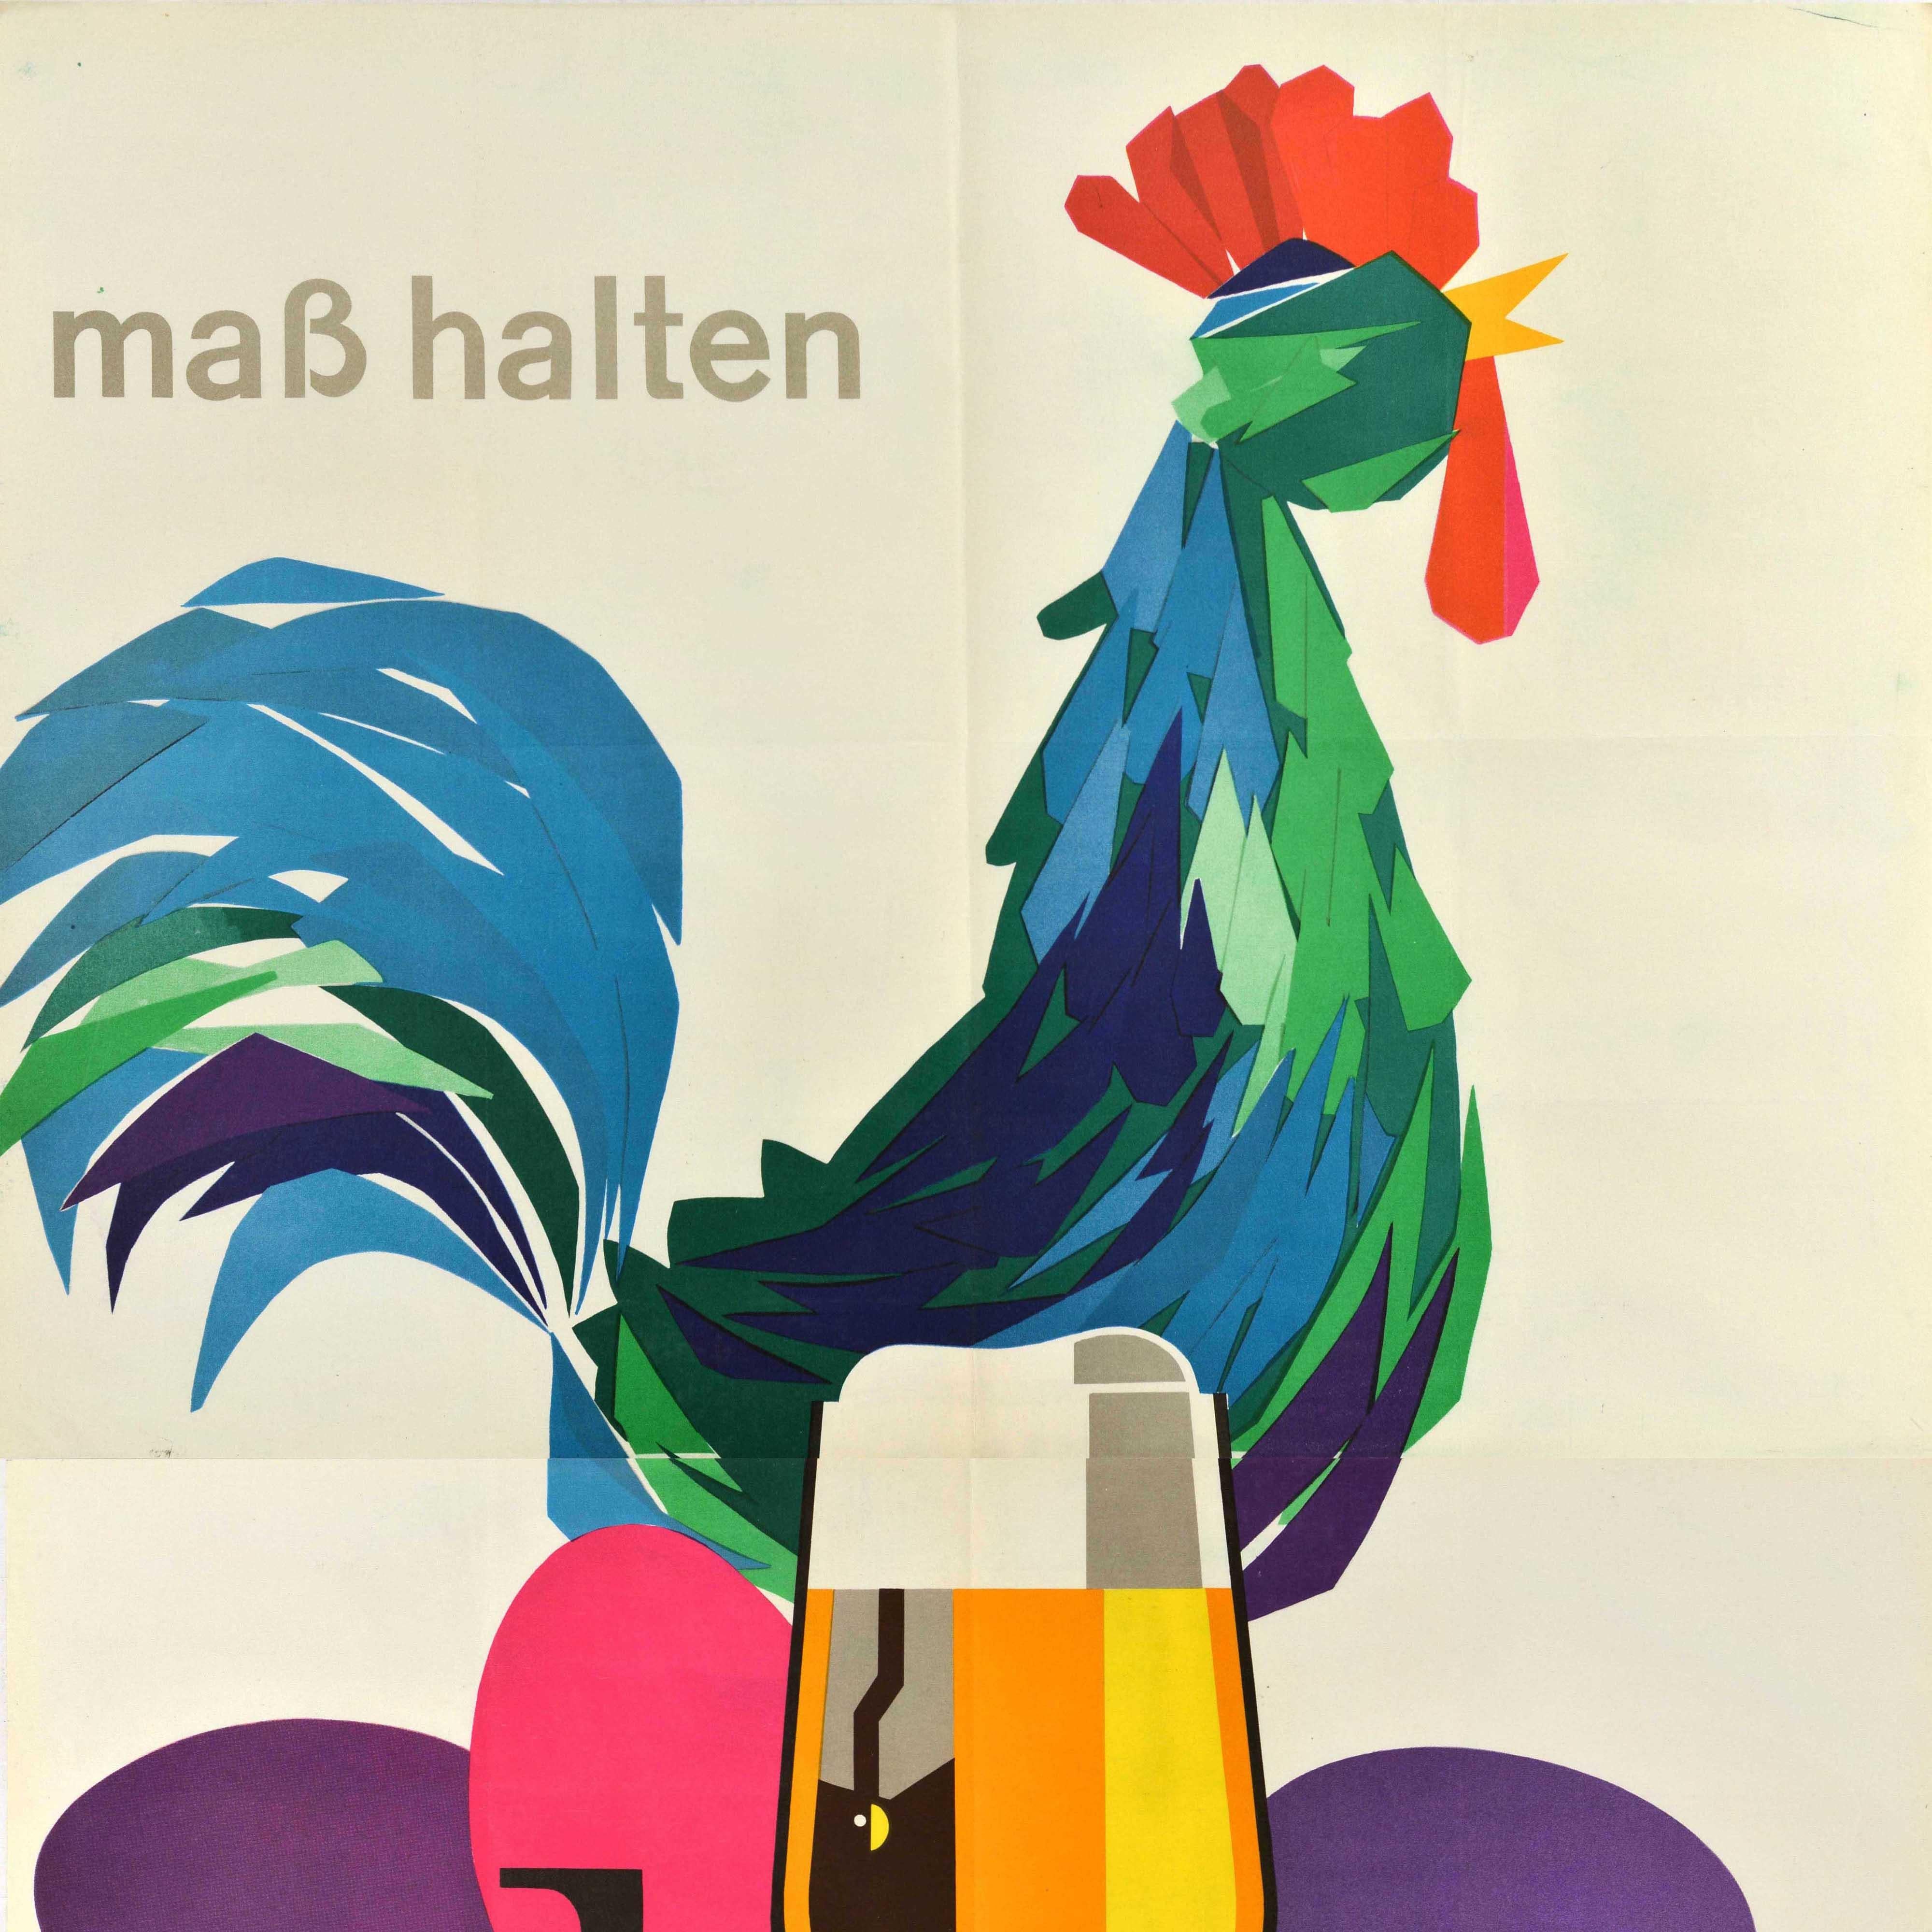 Original vintage advertising poster - Mass halten bier trinken / Drink beer moderately - featuring a fun illustration of a crowing cockerel next to colourful chicken eggs with a glass of beer as part of the i in bier in the foreground. Large size.